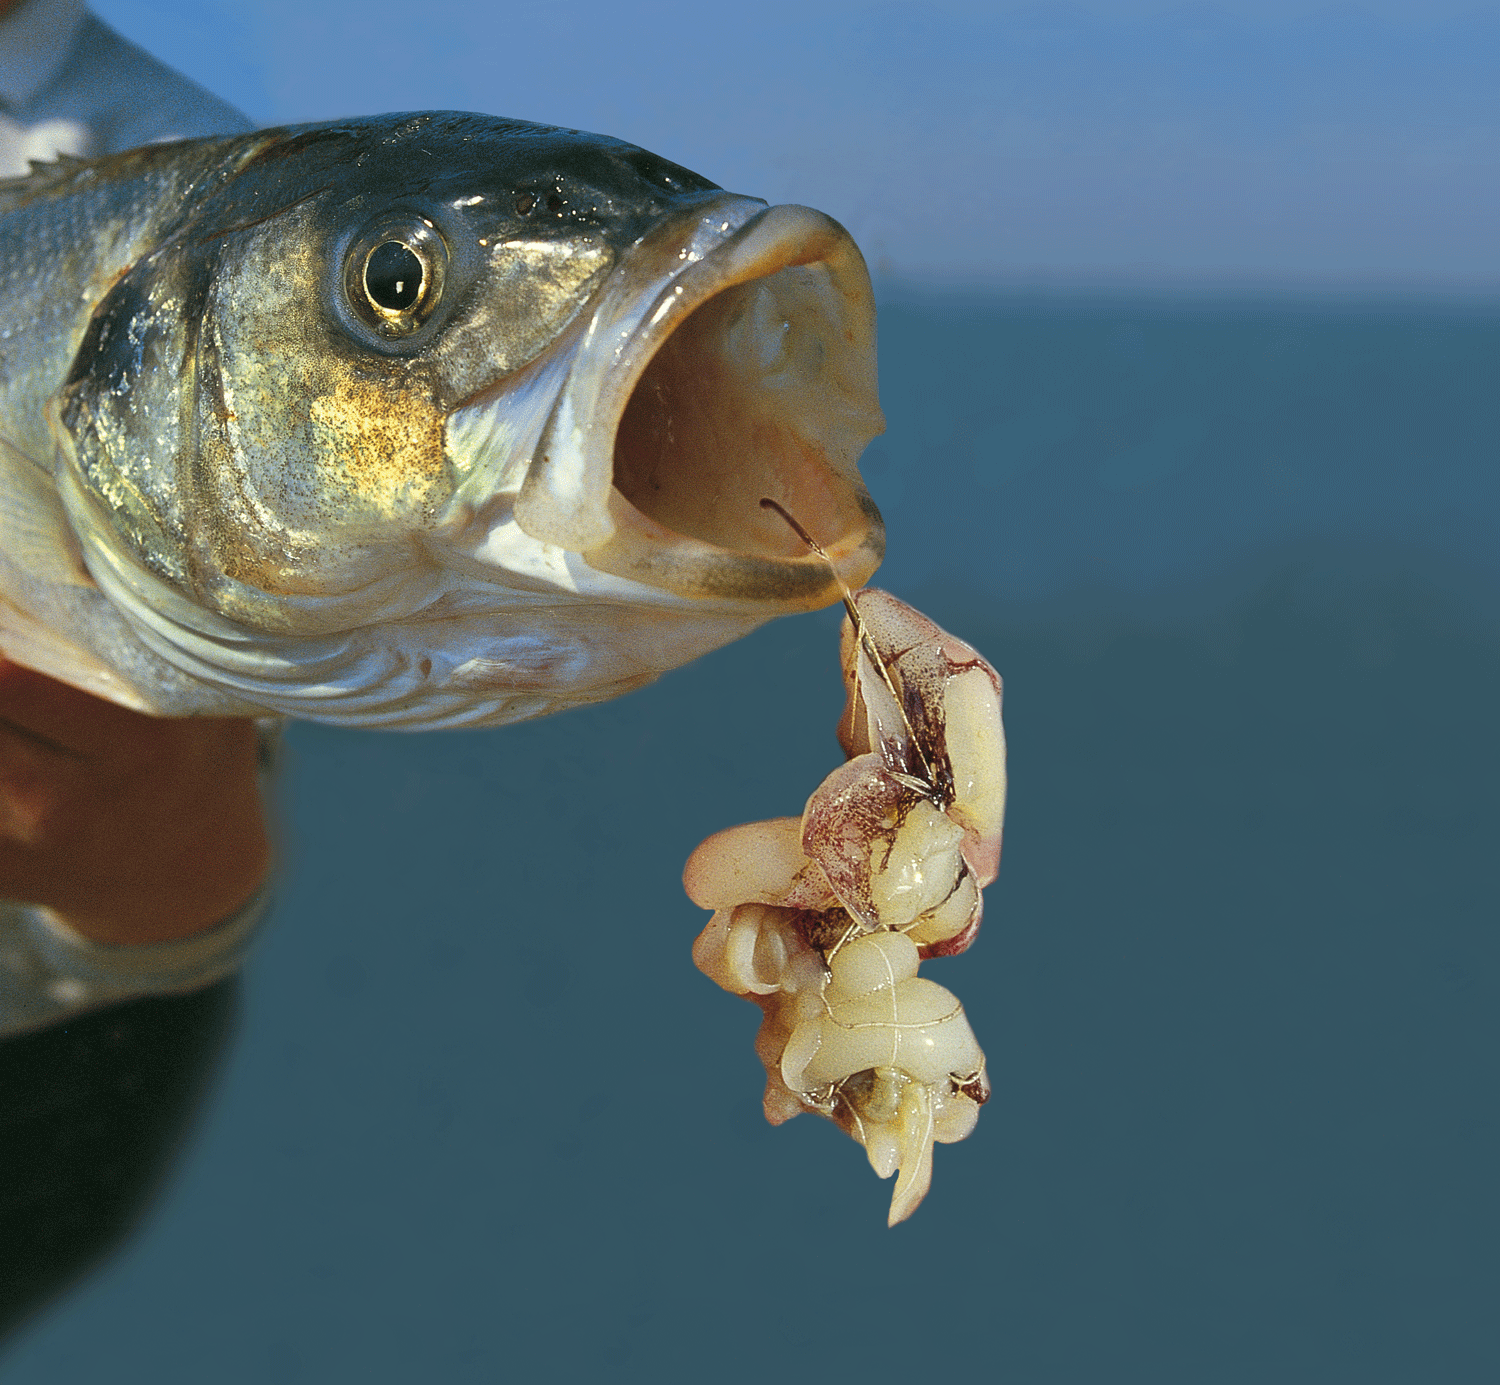 Tackle and Tactics to Catch Autumn Bass Using Squid as Bait - SeaAngler